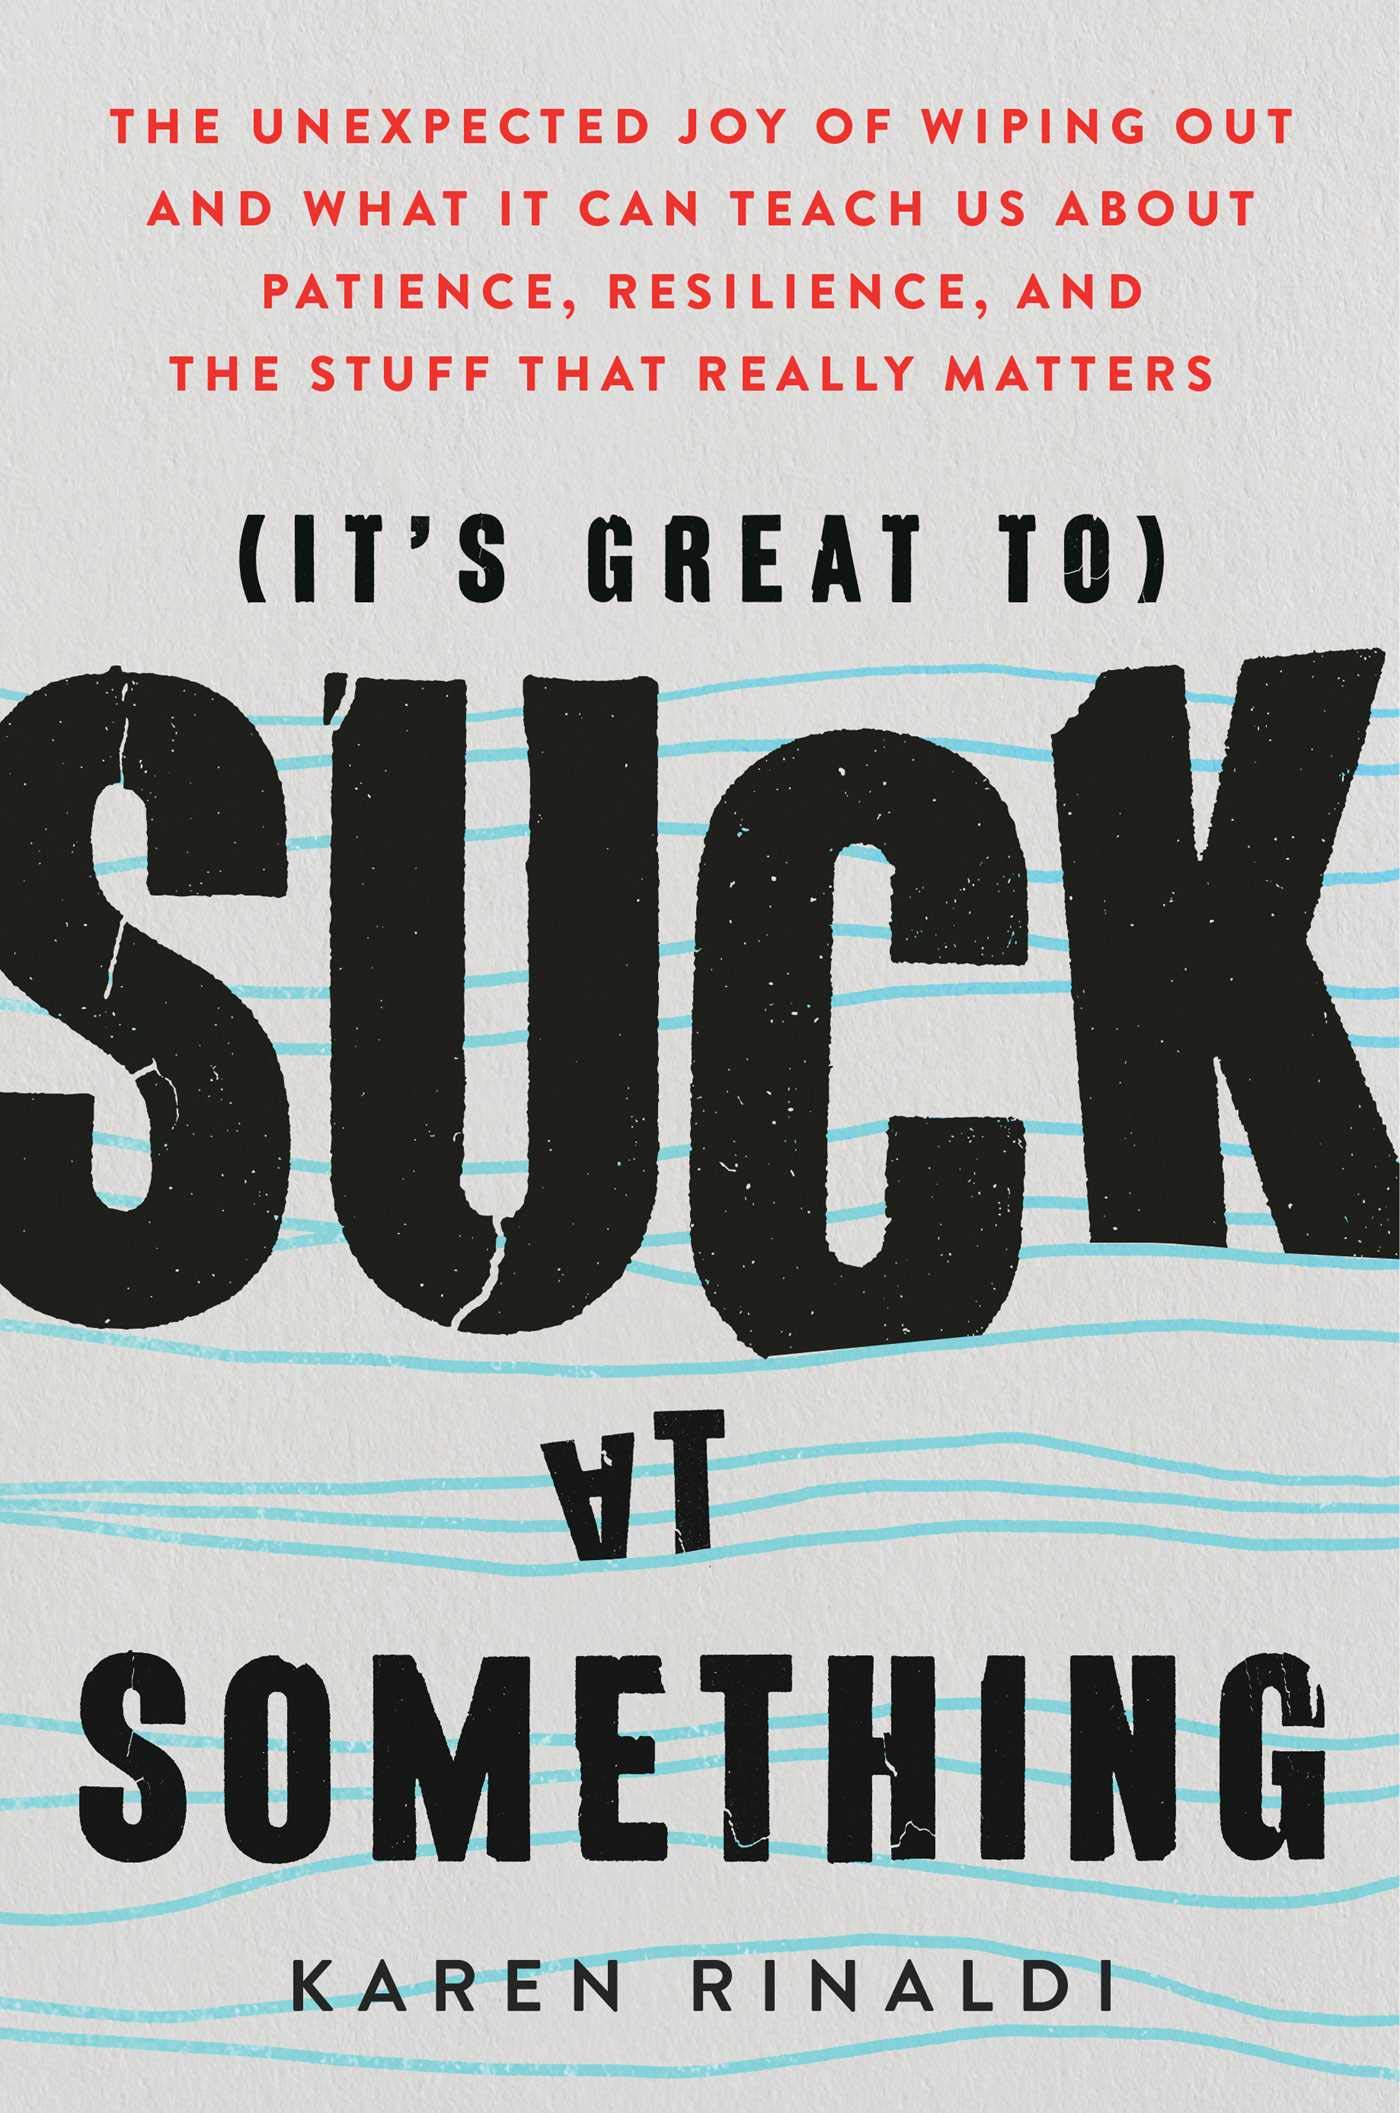 cover image (It’s Great to) Suck at Something: The Unexpected Joy of Wiping Out and What It Can Teach Us About Patience, Resilience, and the Stuff that Really Matters